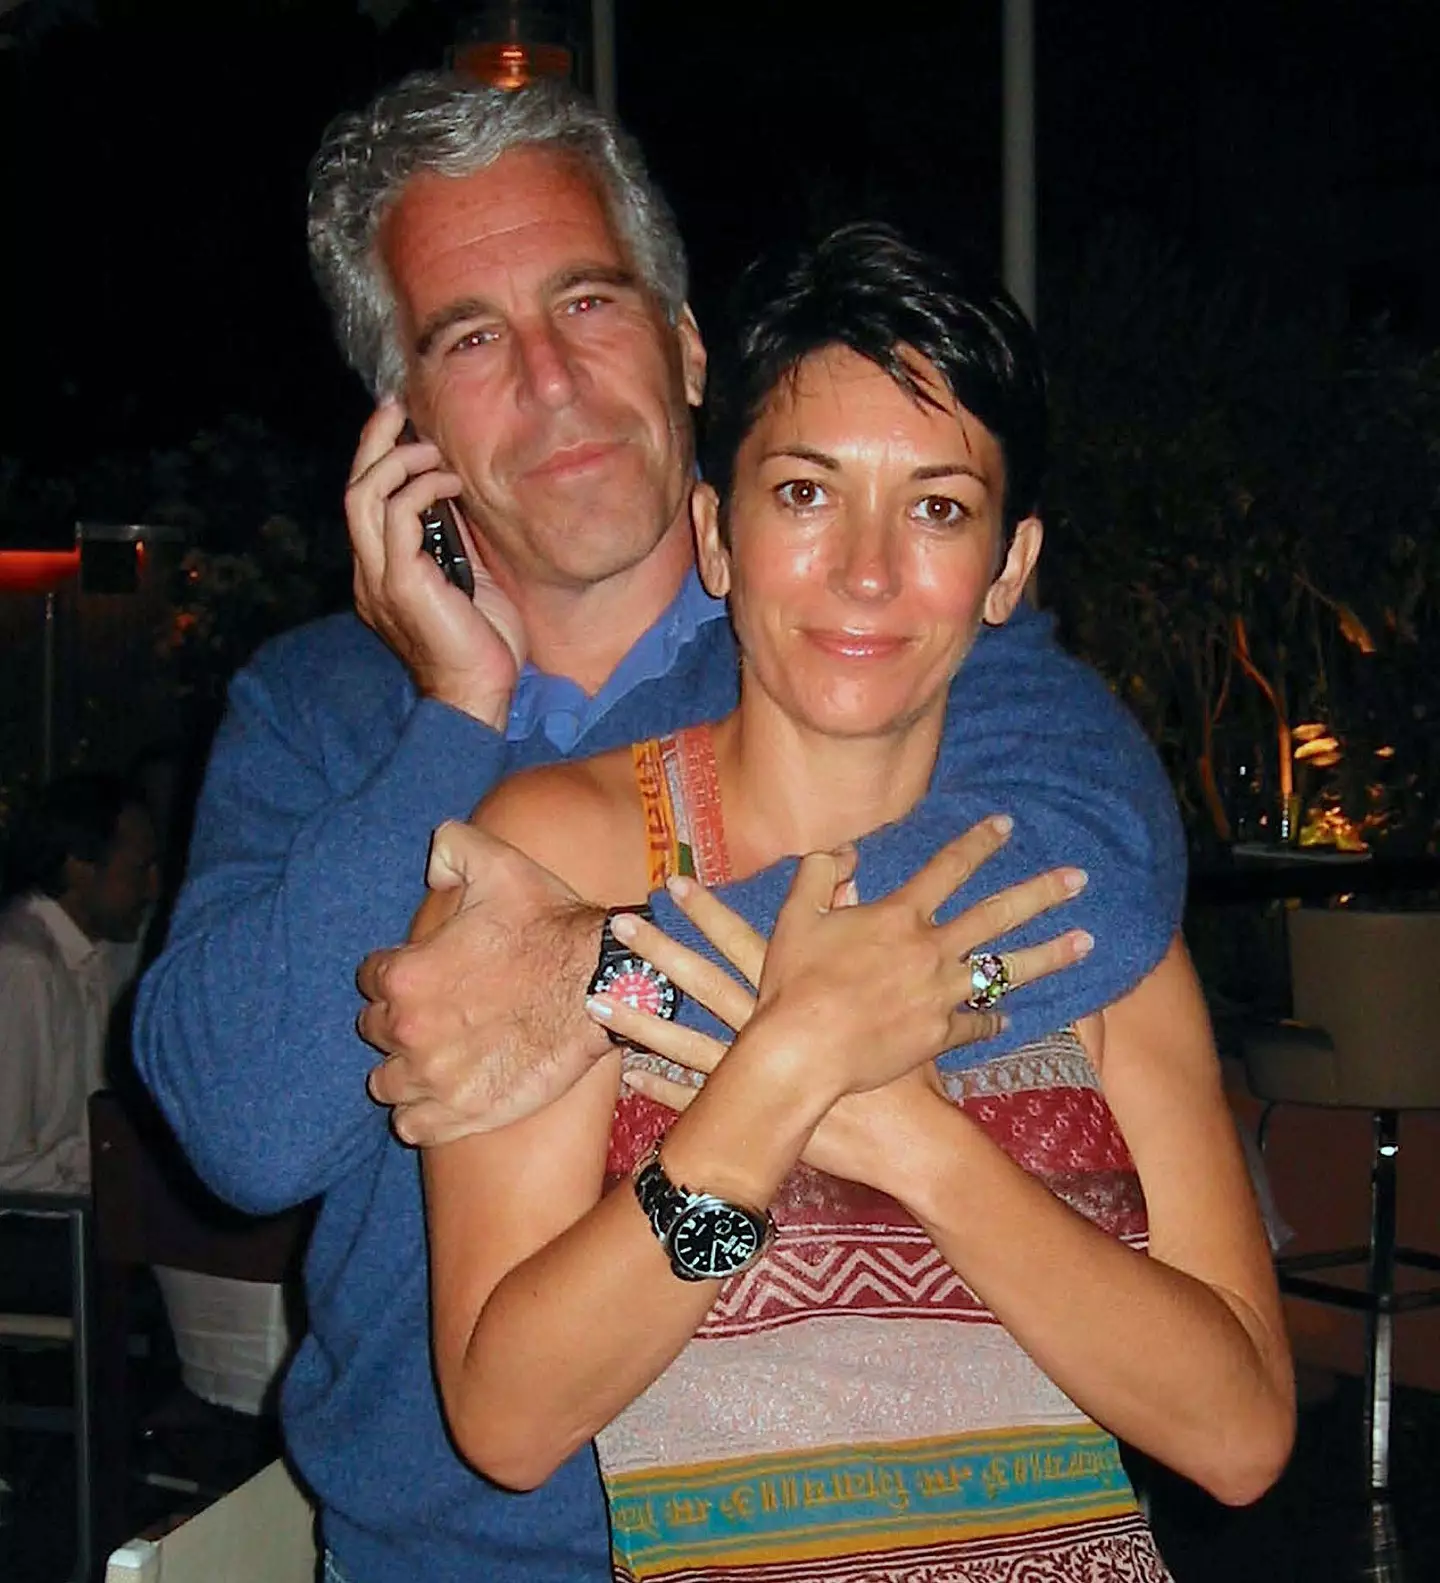 Ghislaine Maxwell, pictured with Jeffrey Epstein, was sentenced to 20 years in prison in June.